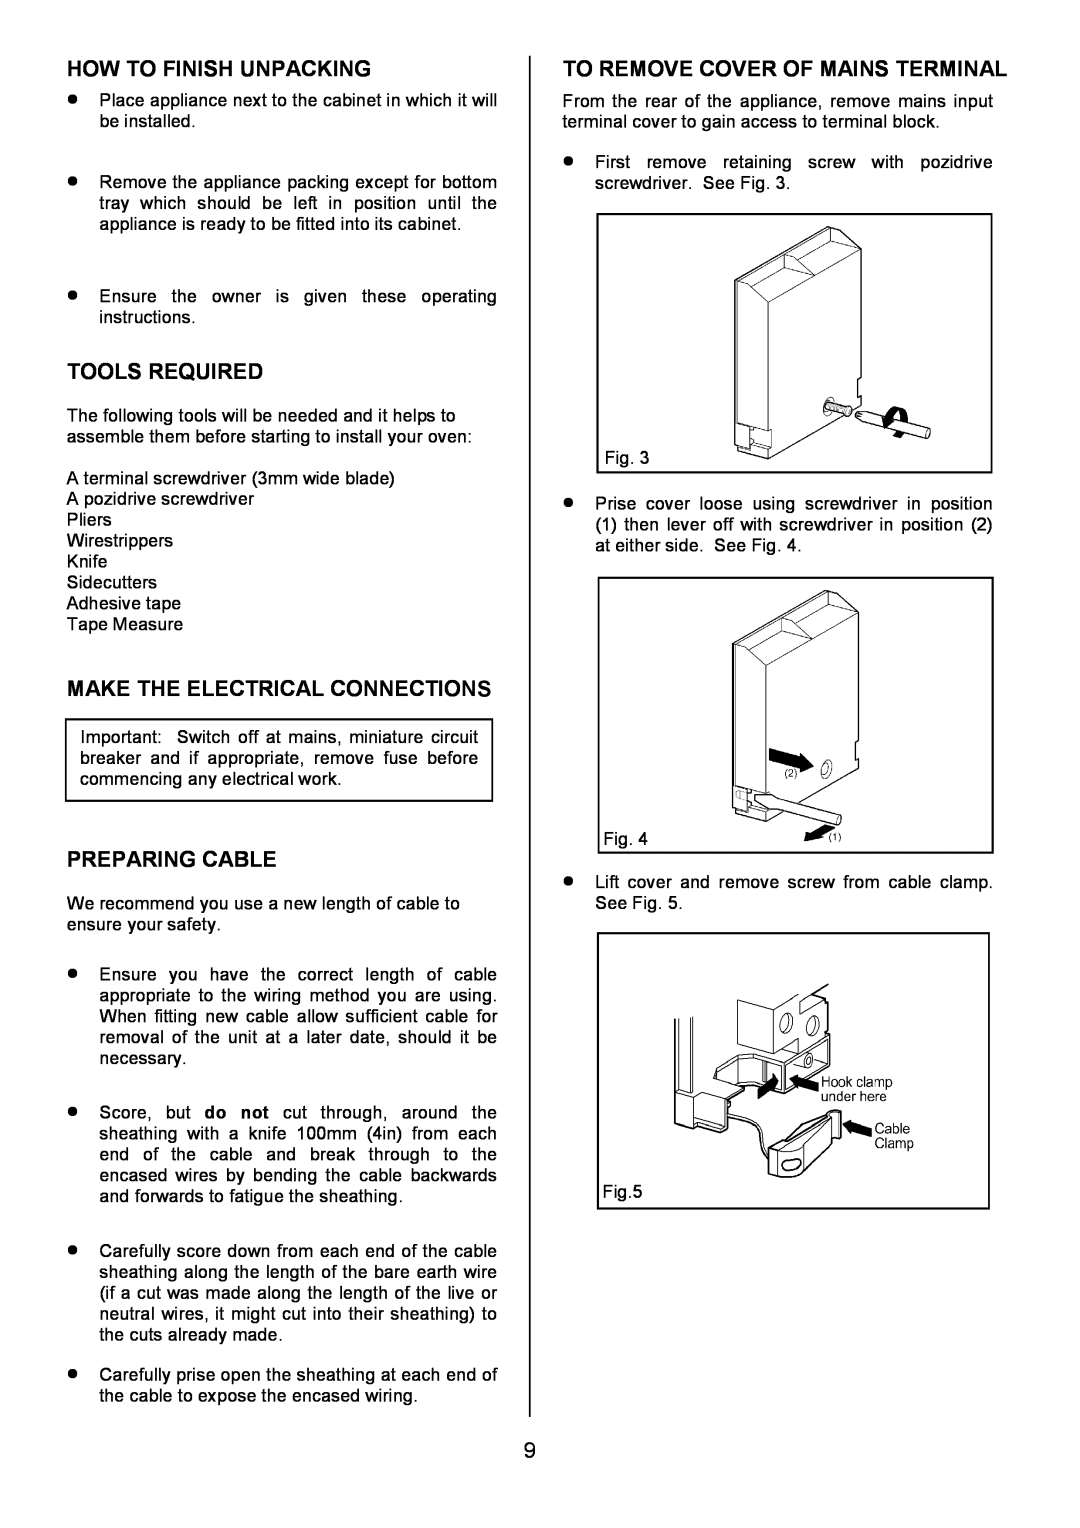 Electrolux EOD6390 manual How To Finish Unpacking, Tools Required, Make The Electrical Connections, Preparing Cable 